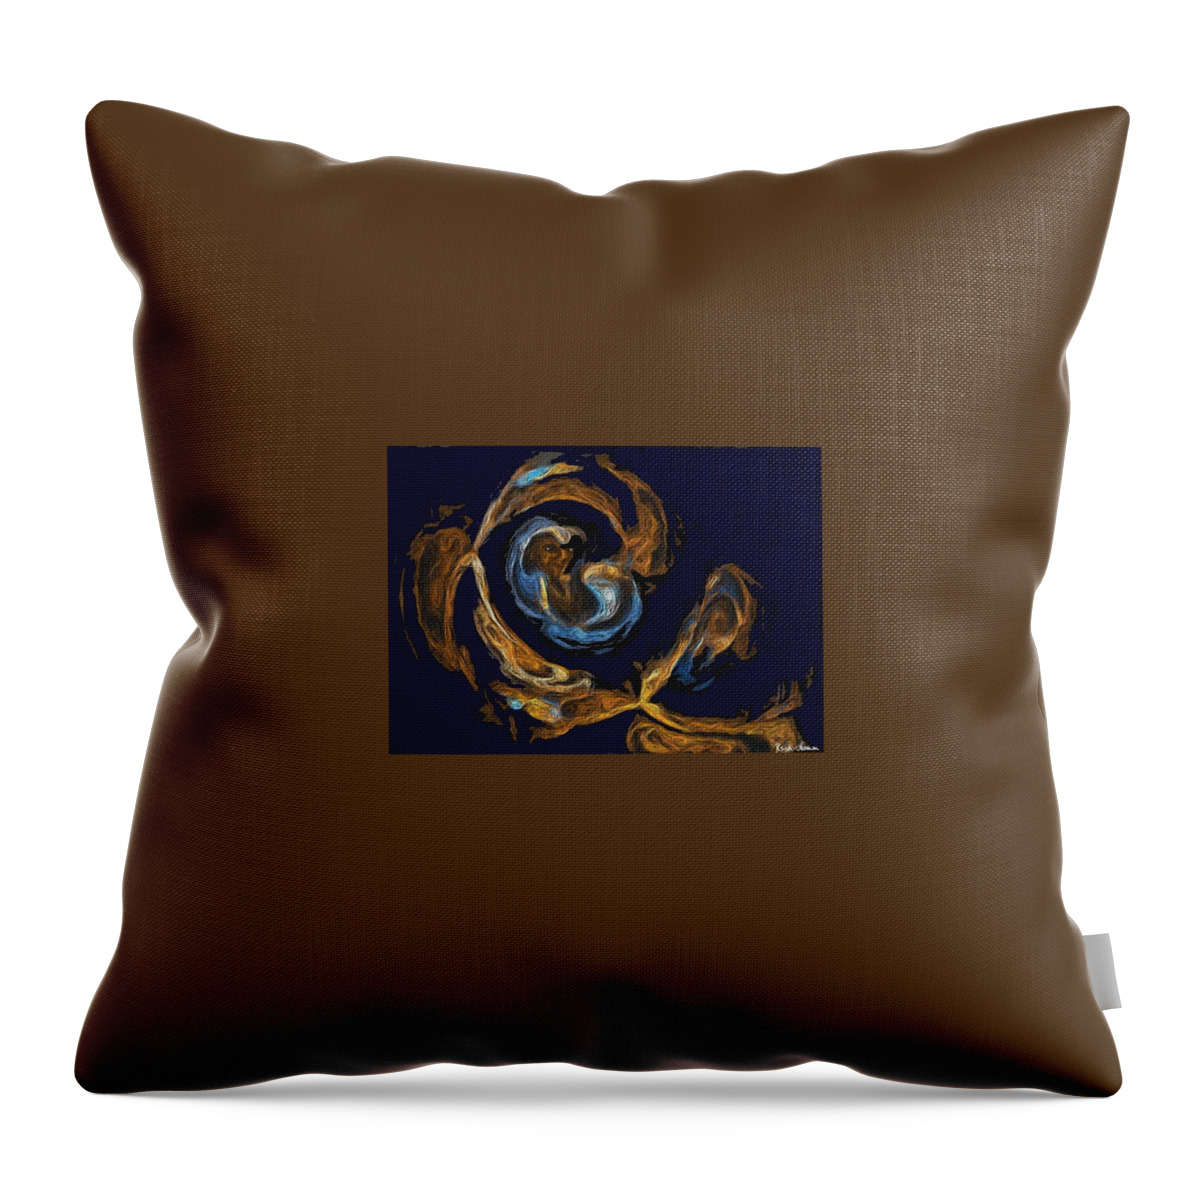  Throw Pillow featuring the digital art Shhh Don't Tell by Rein Nomm